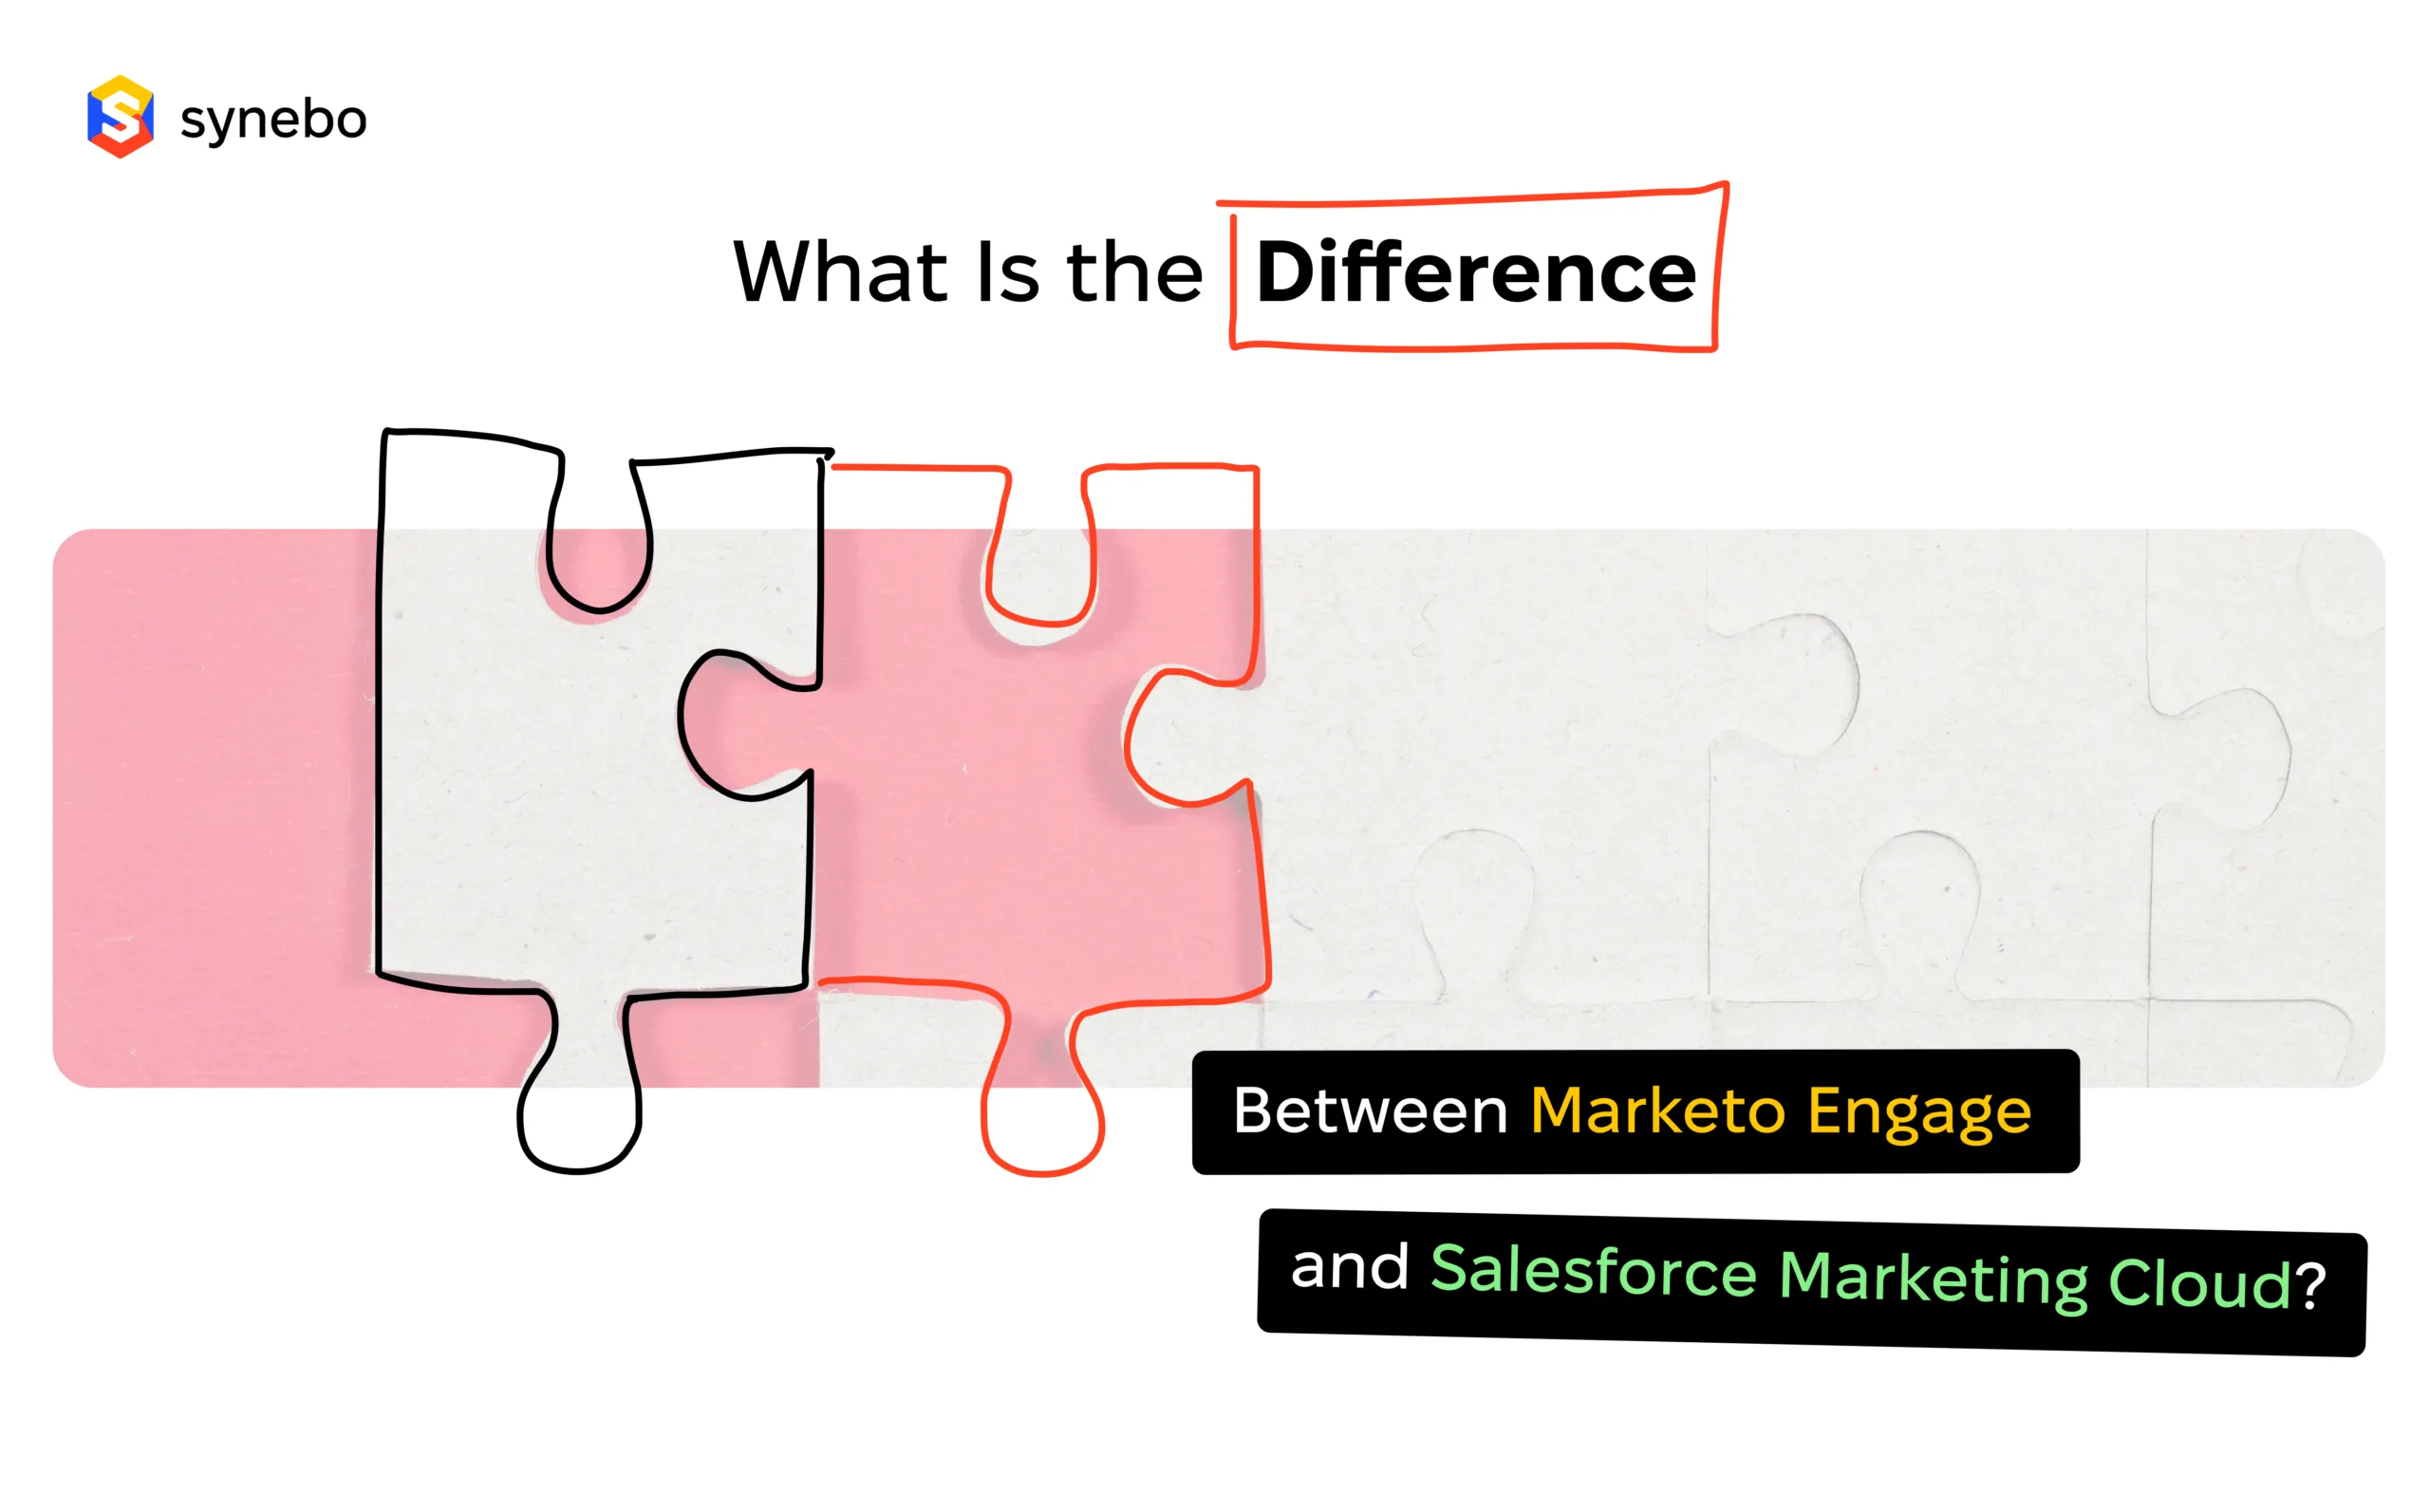 What Is the Difference Between Marketo Engage and Salesforce Marketing Cloud?